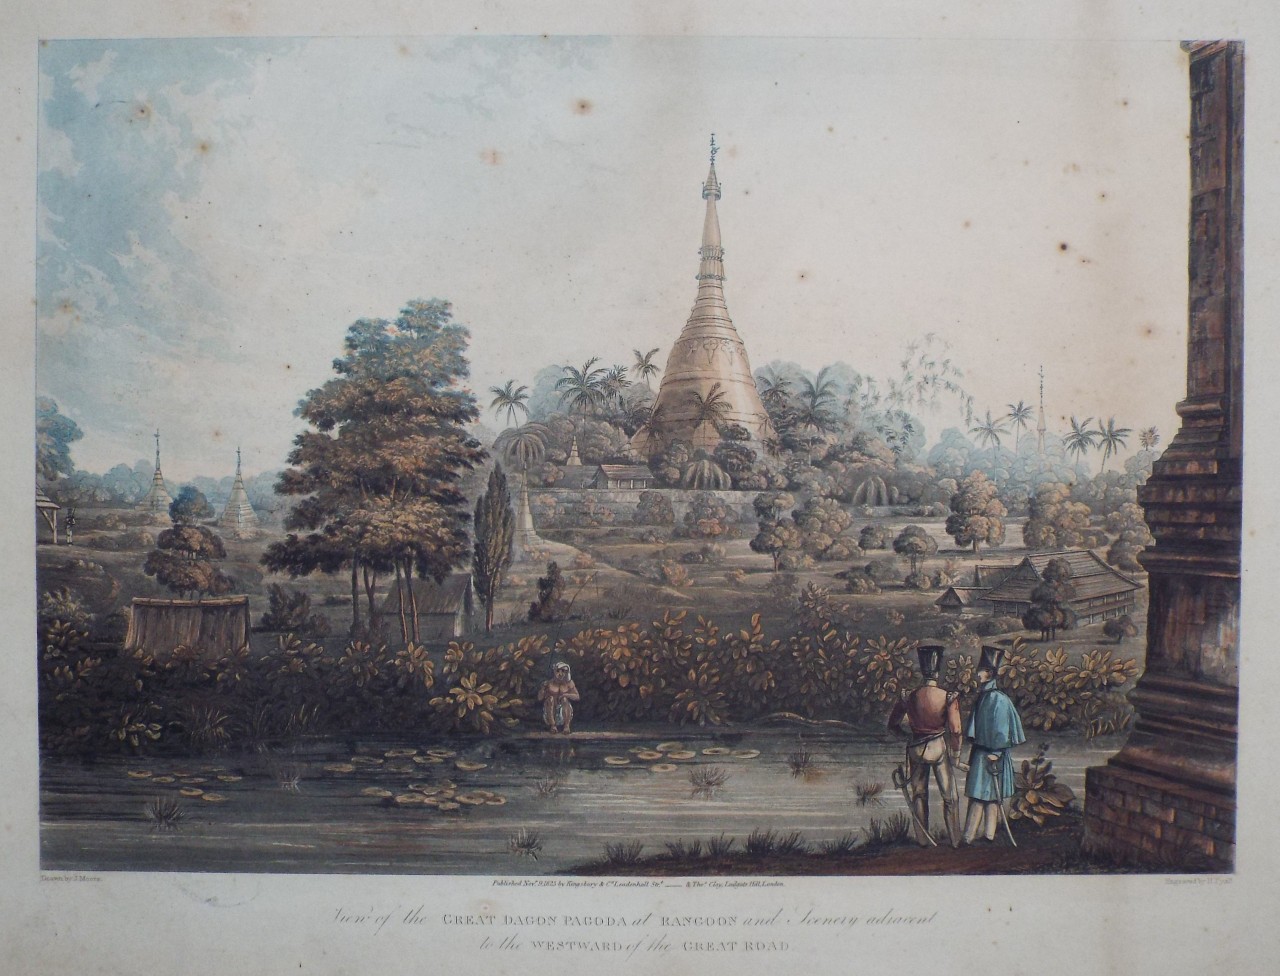 Aquatint - View of the Great Dragon Pagoda at Rangoon and Scenery adjacent to the Westward of the Great Road. - Pyall